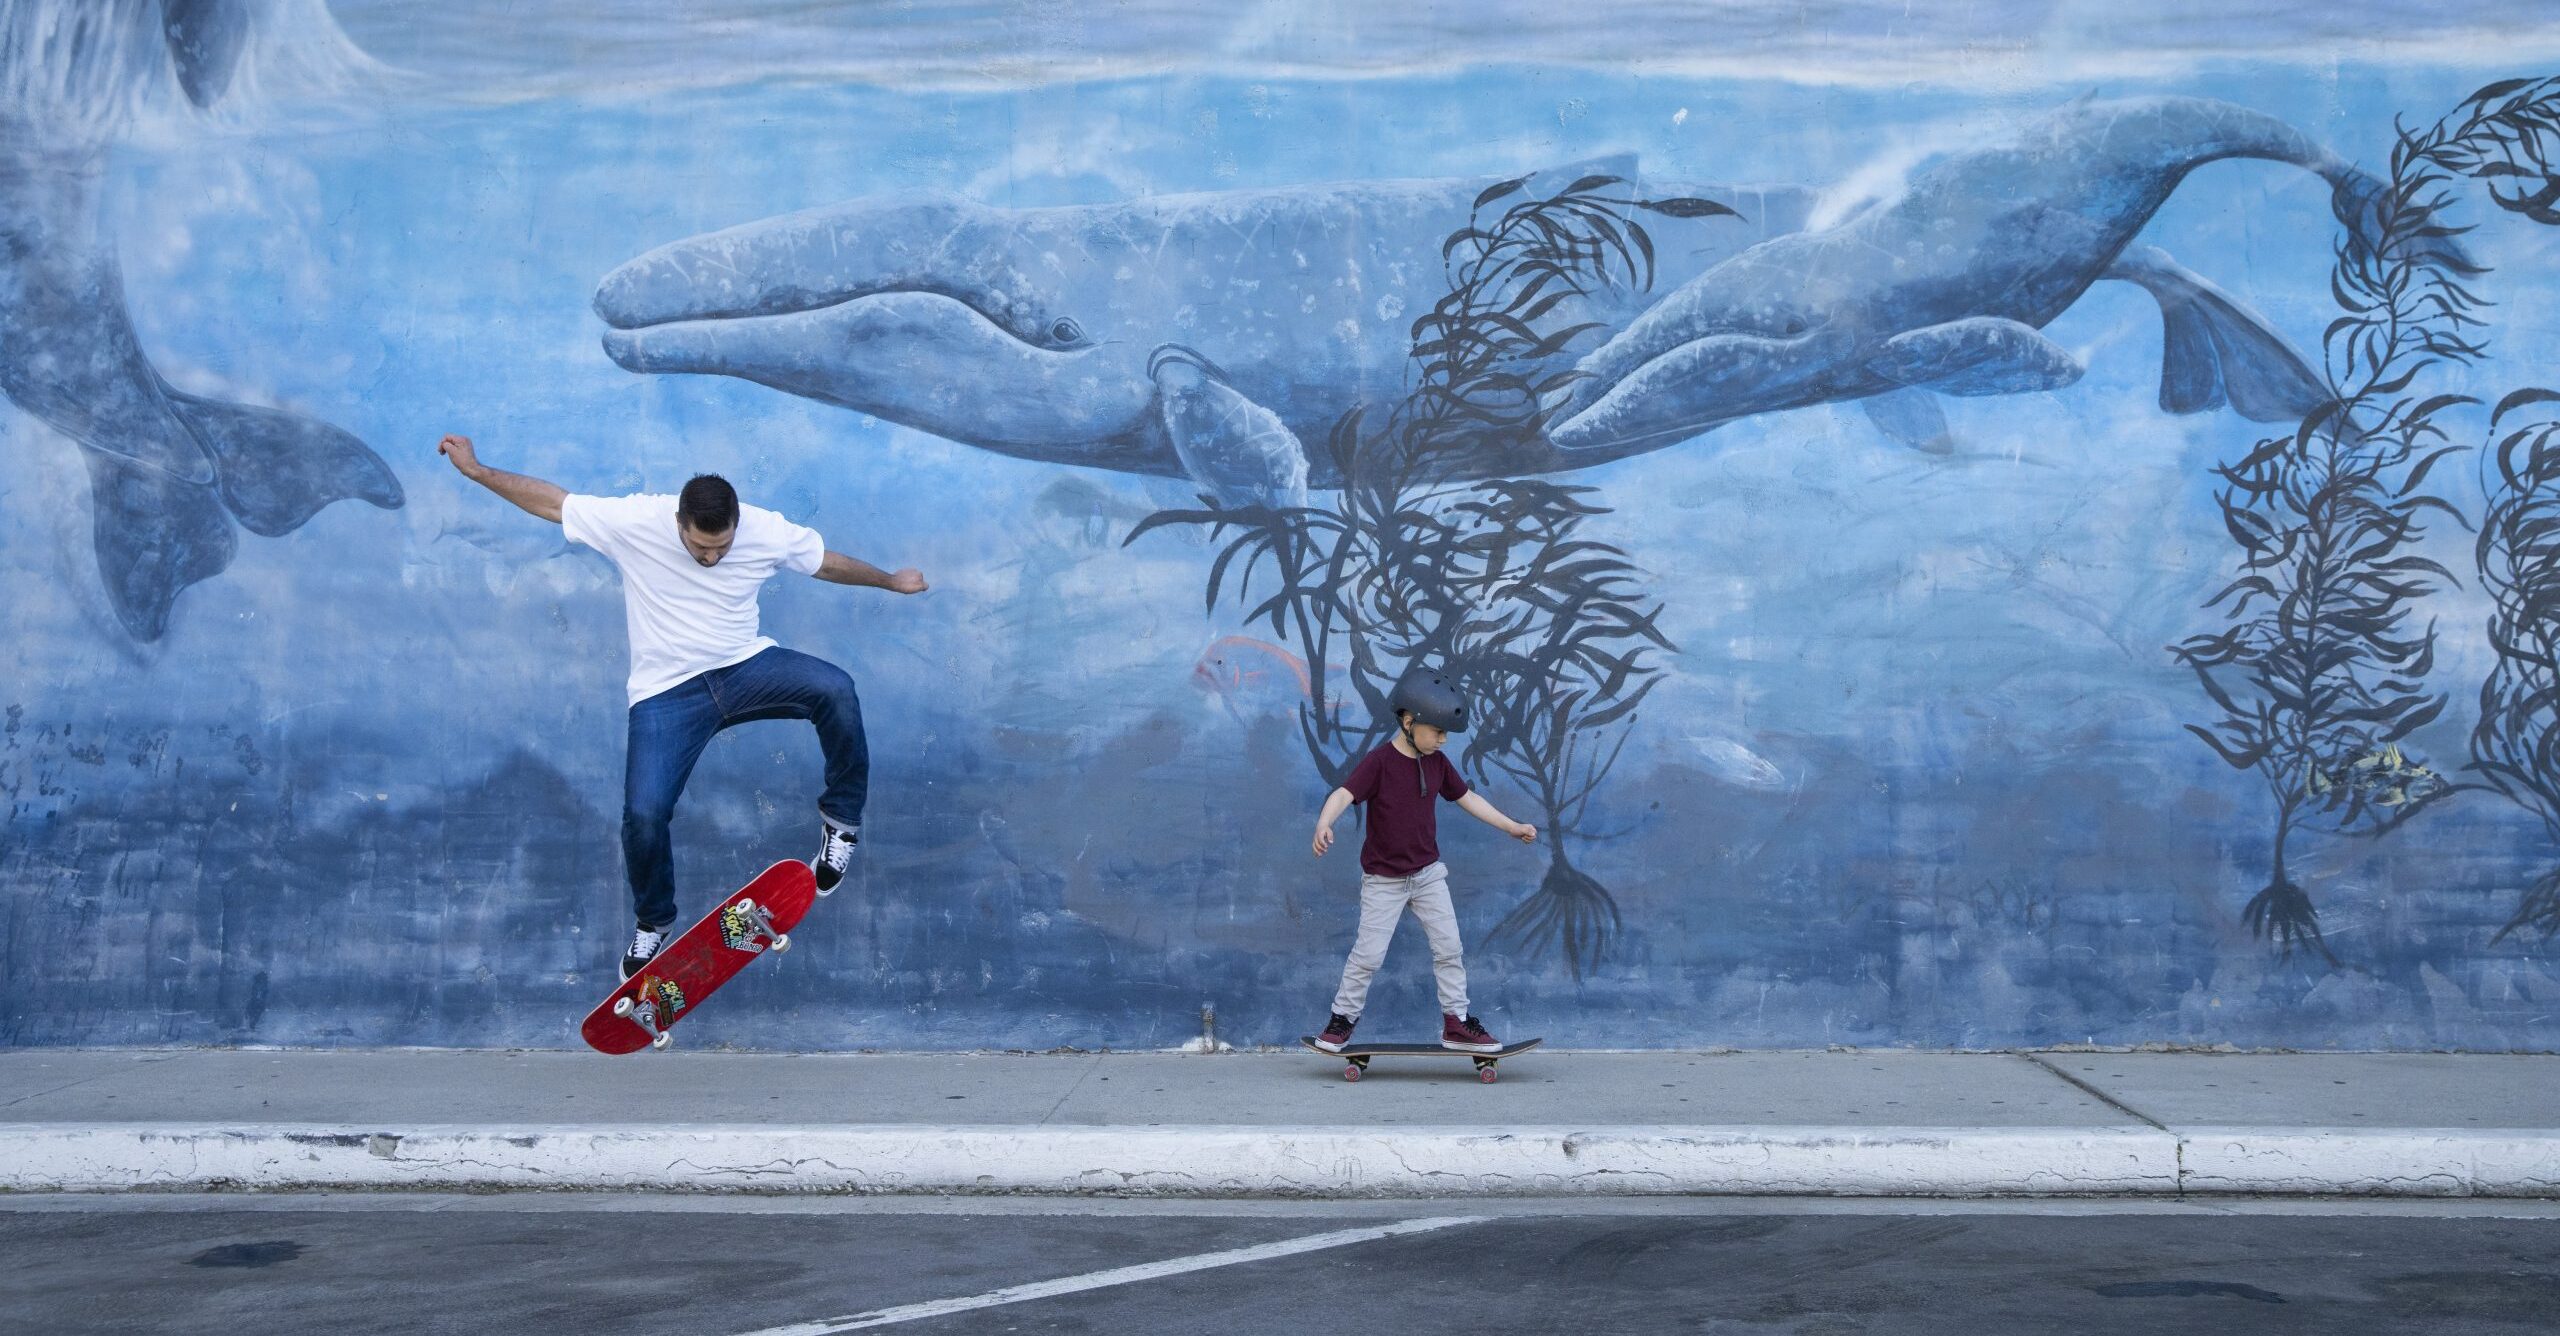 Mural with skateboarders